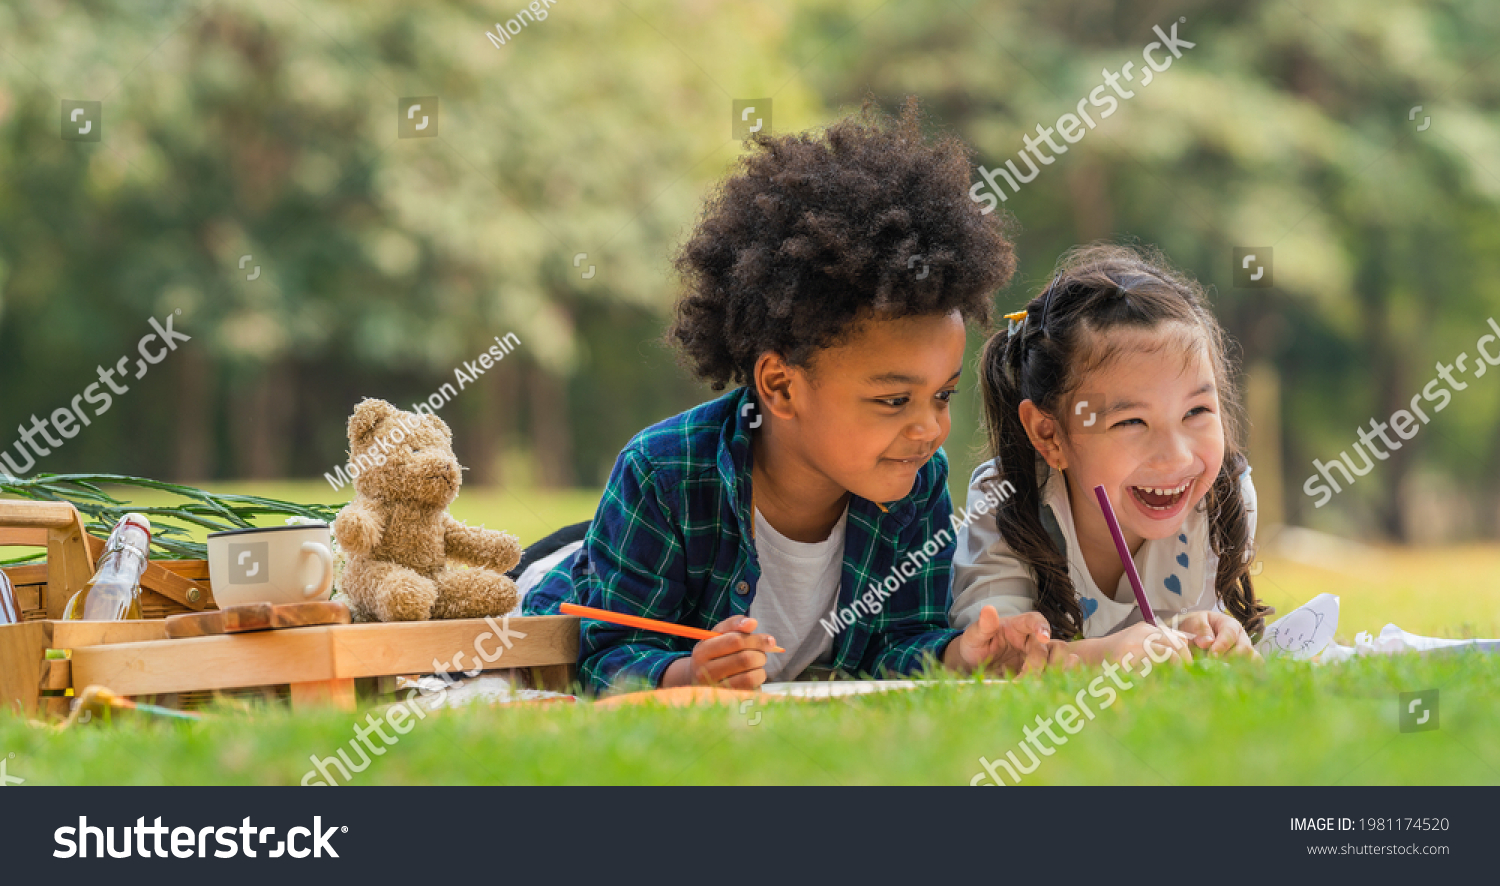 diverse mixed race kids boy and girl as friends having fun playing together during picnic in park in summer #1981174520